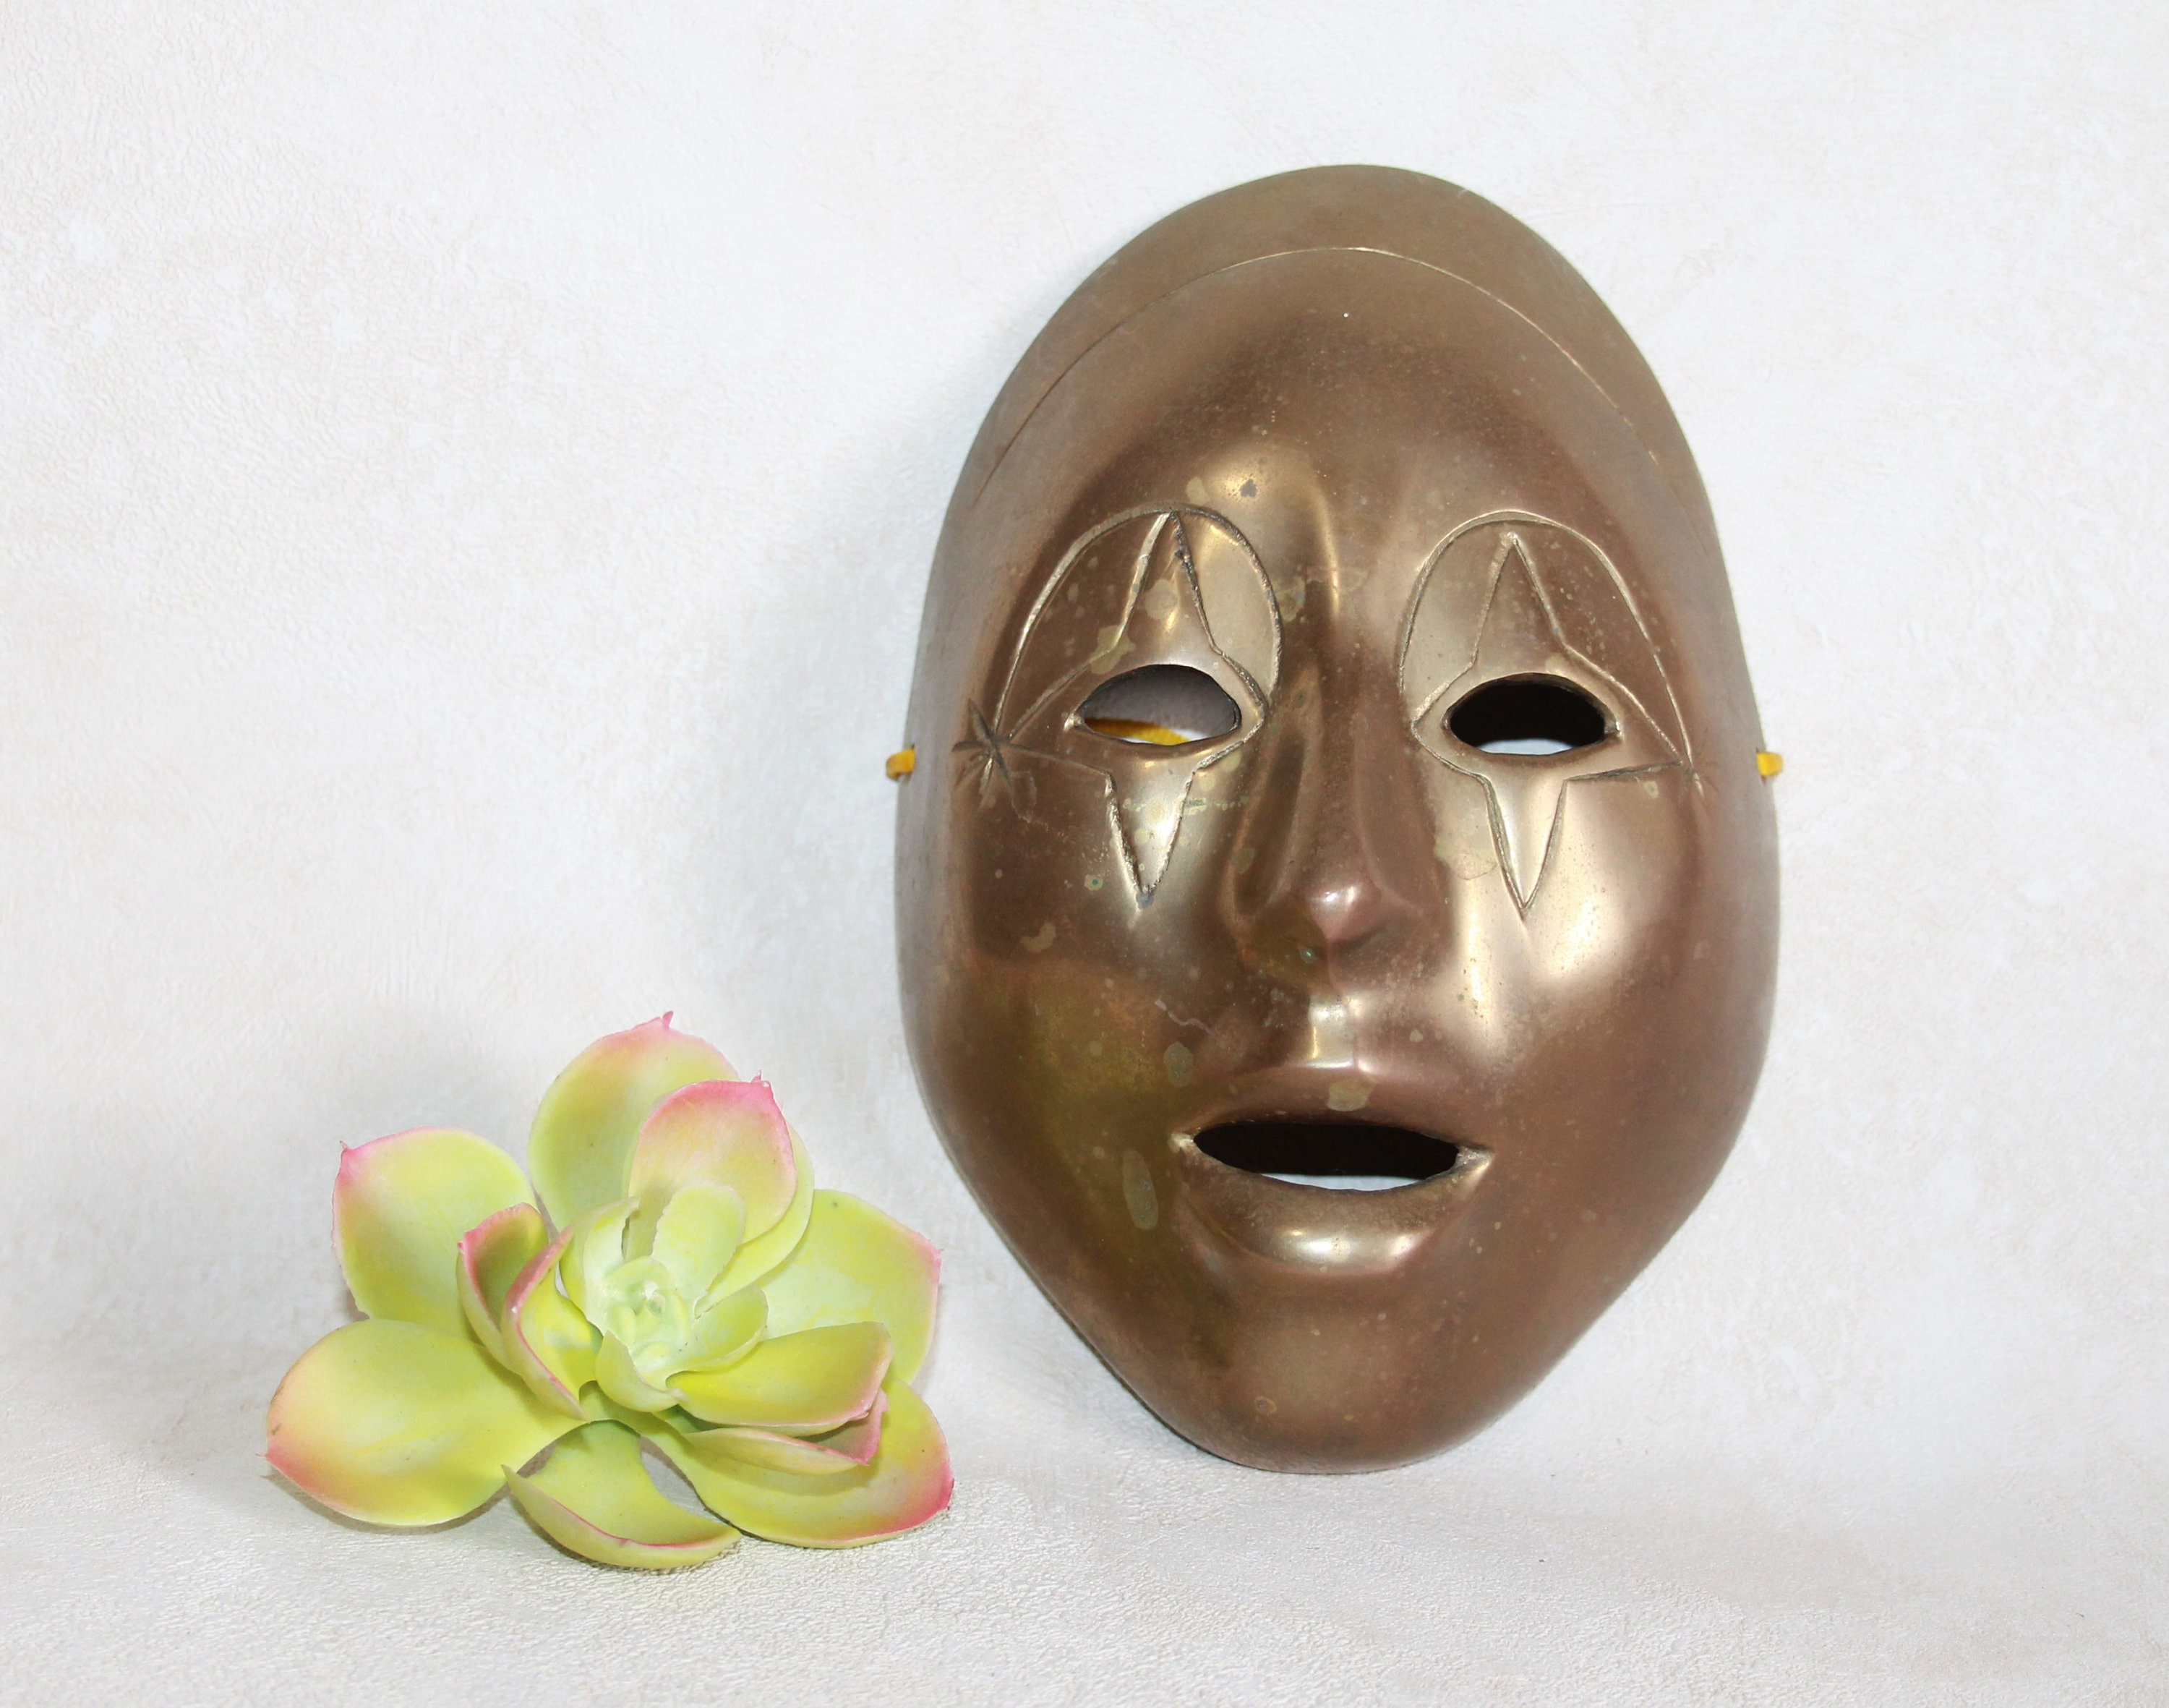 Vintage Solid Brass Decorative Mask, Made in India, Two-toned Brass Mask  Mardi Gras Mask -  Canada